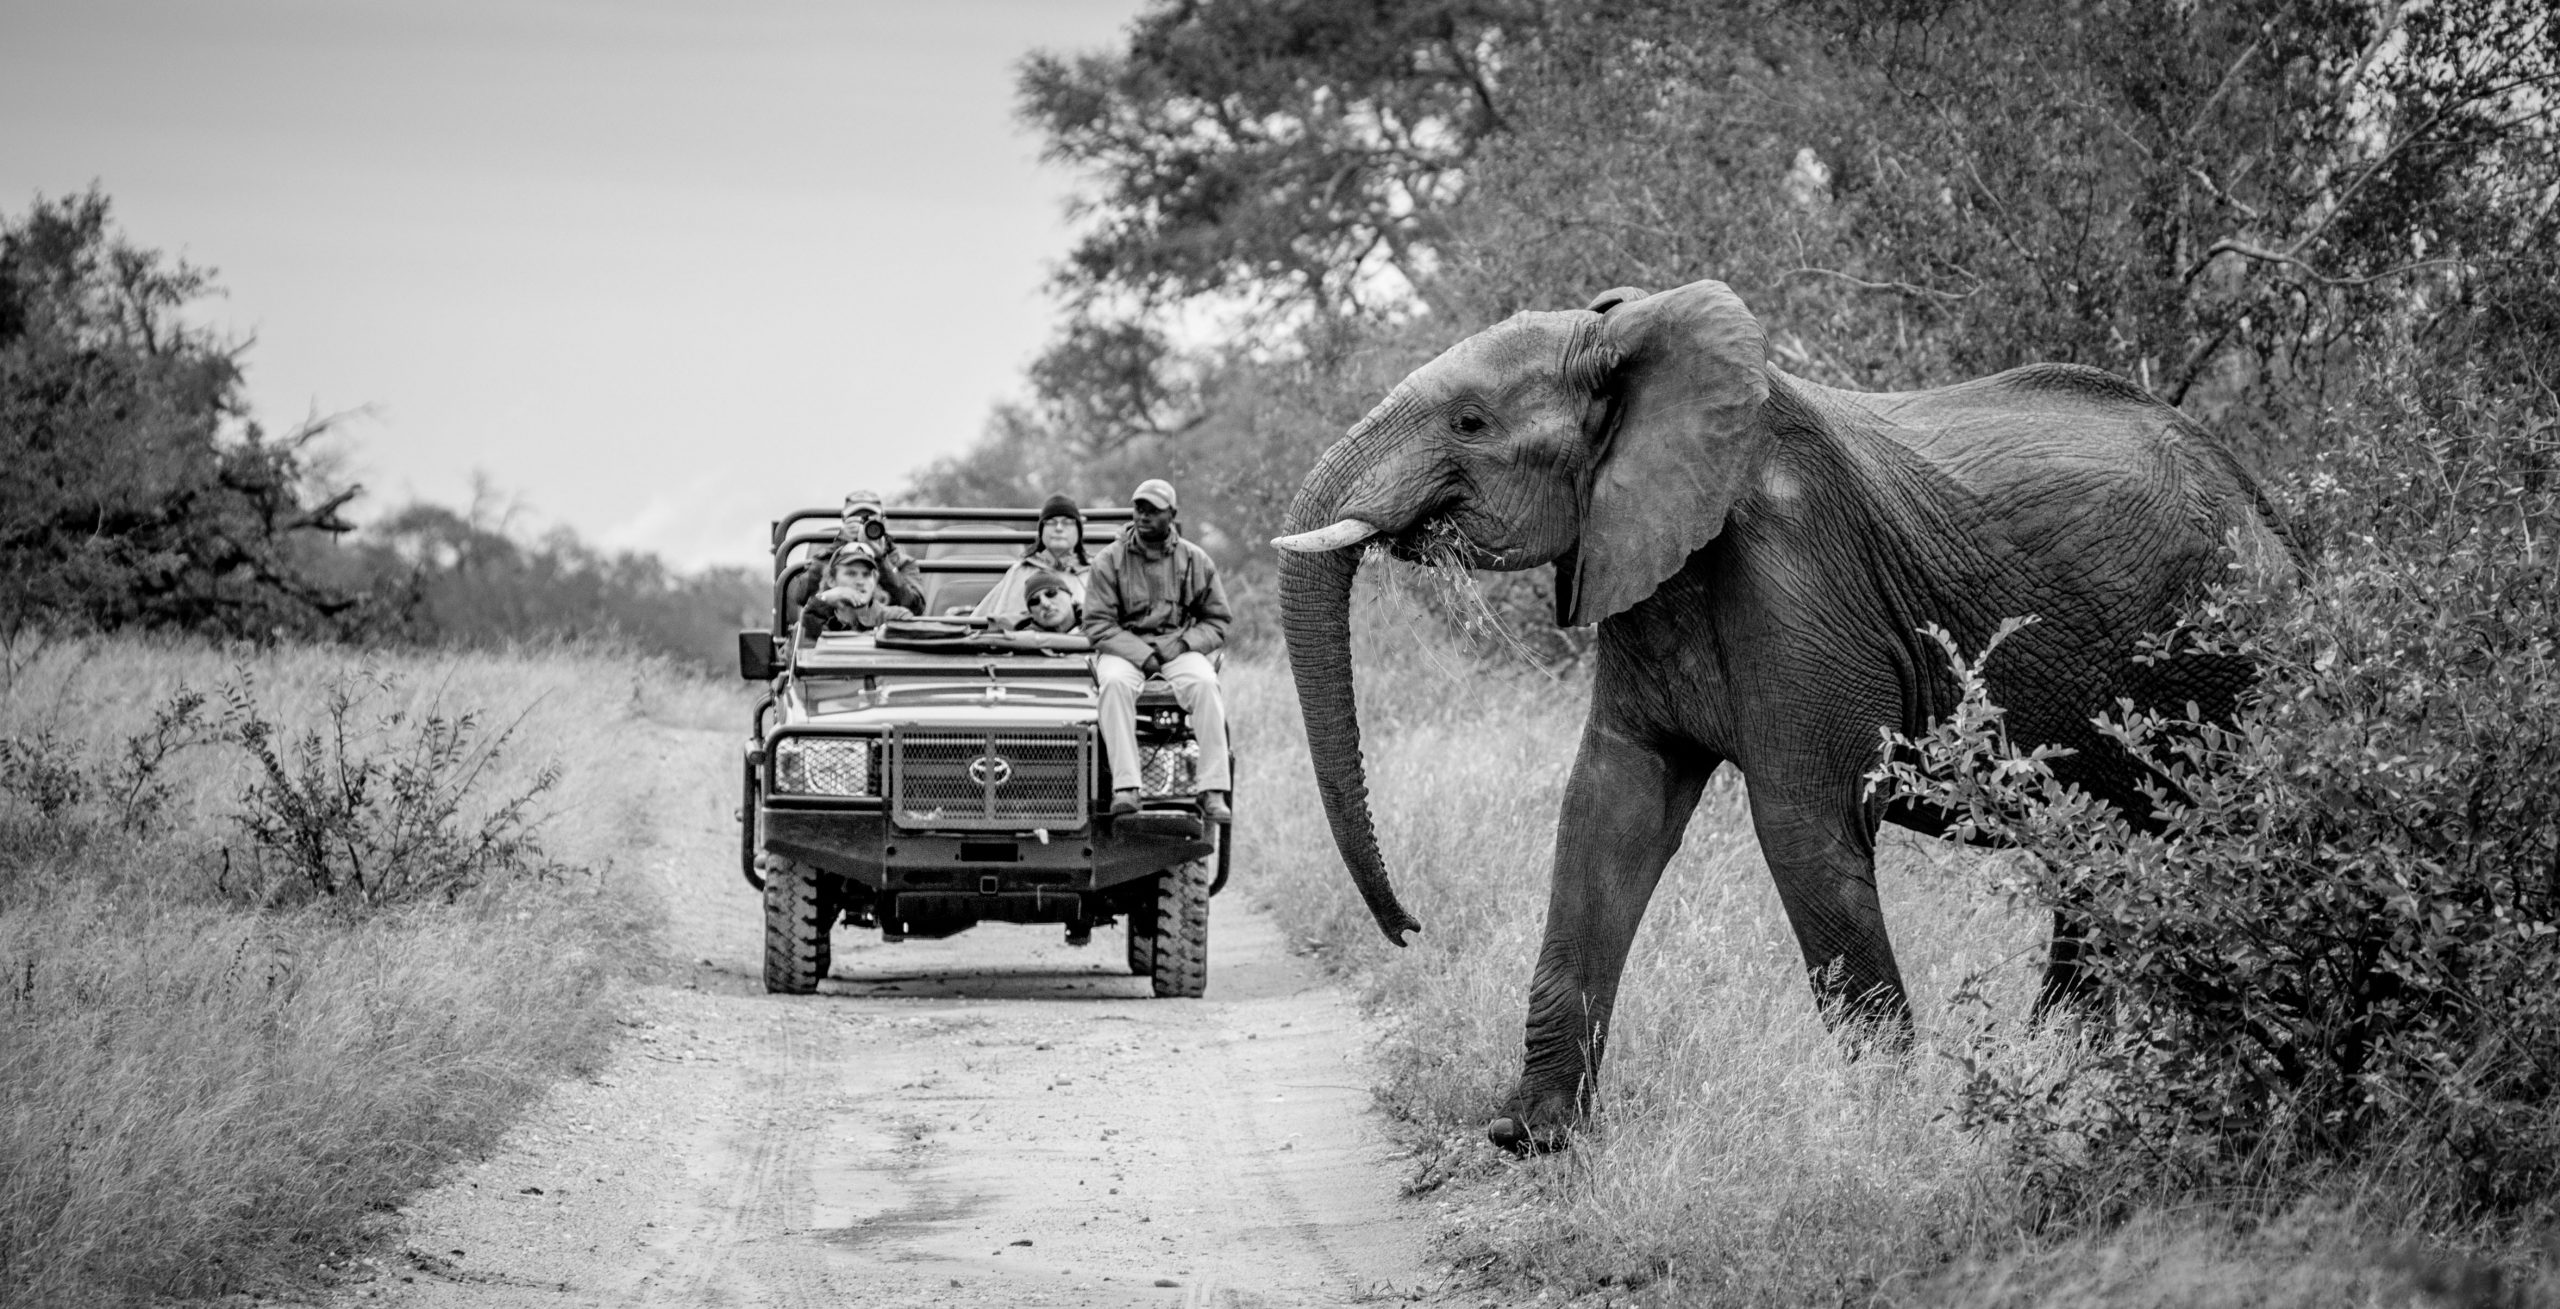 Elephant passing by a wildlife photo tour